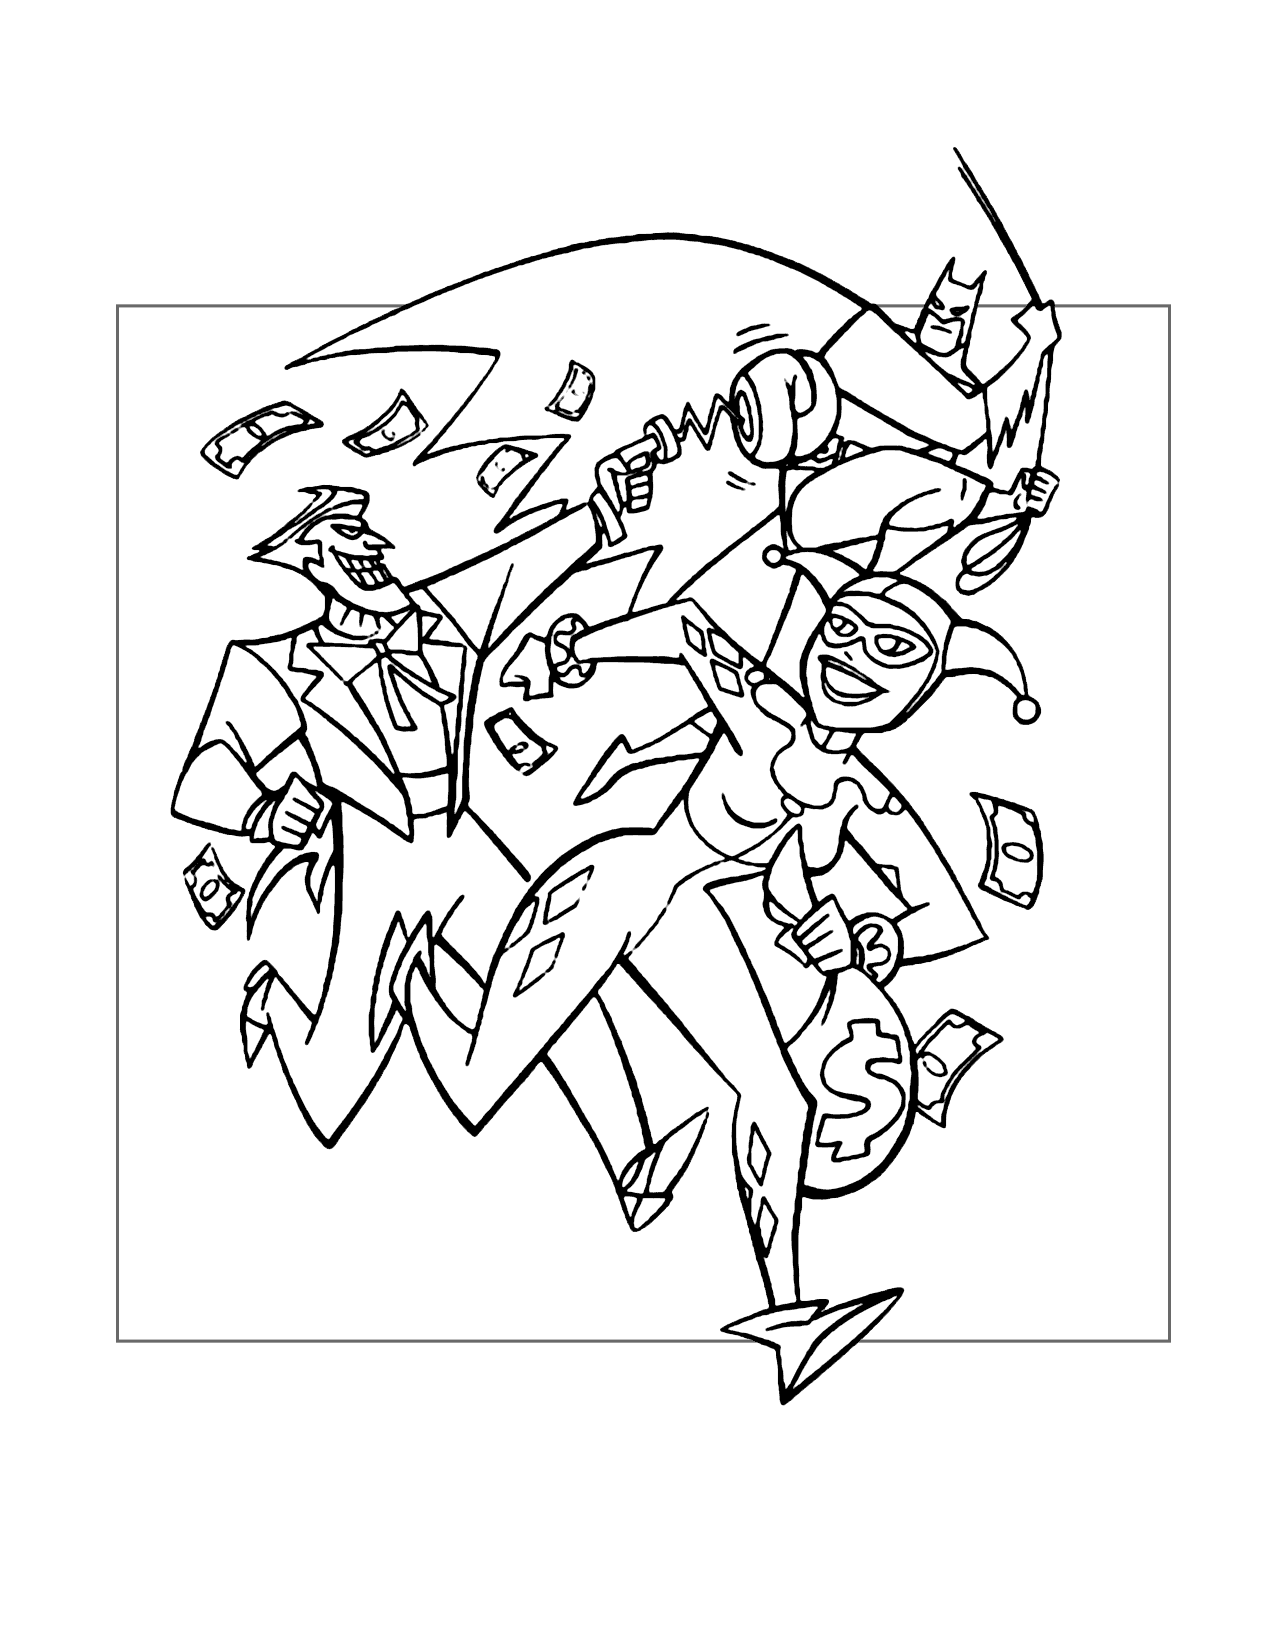 Harley Quinn And Joker Running From Batman Coloring Page